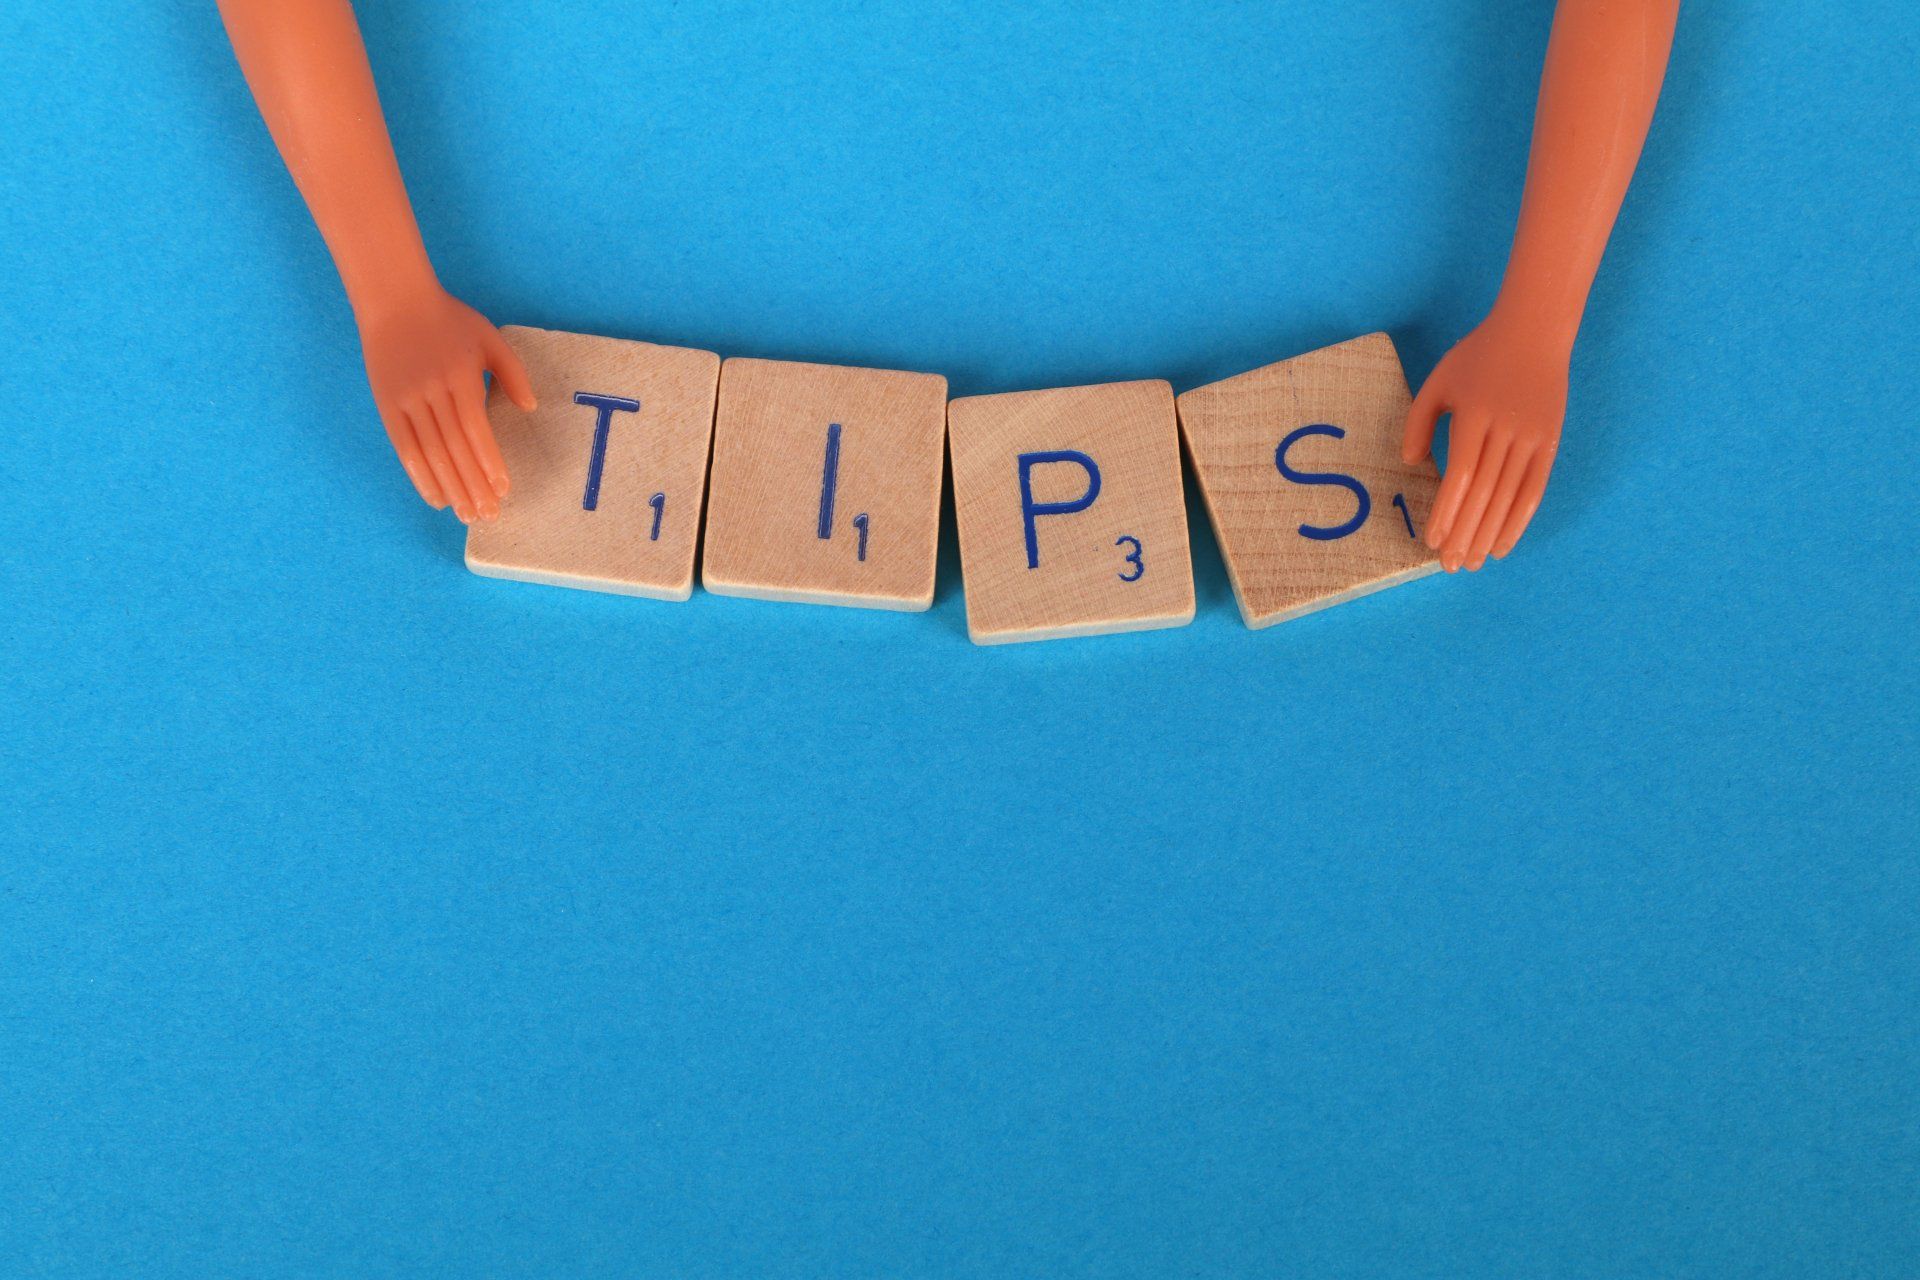 the word tips is written on a blue background